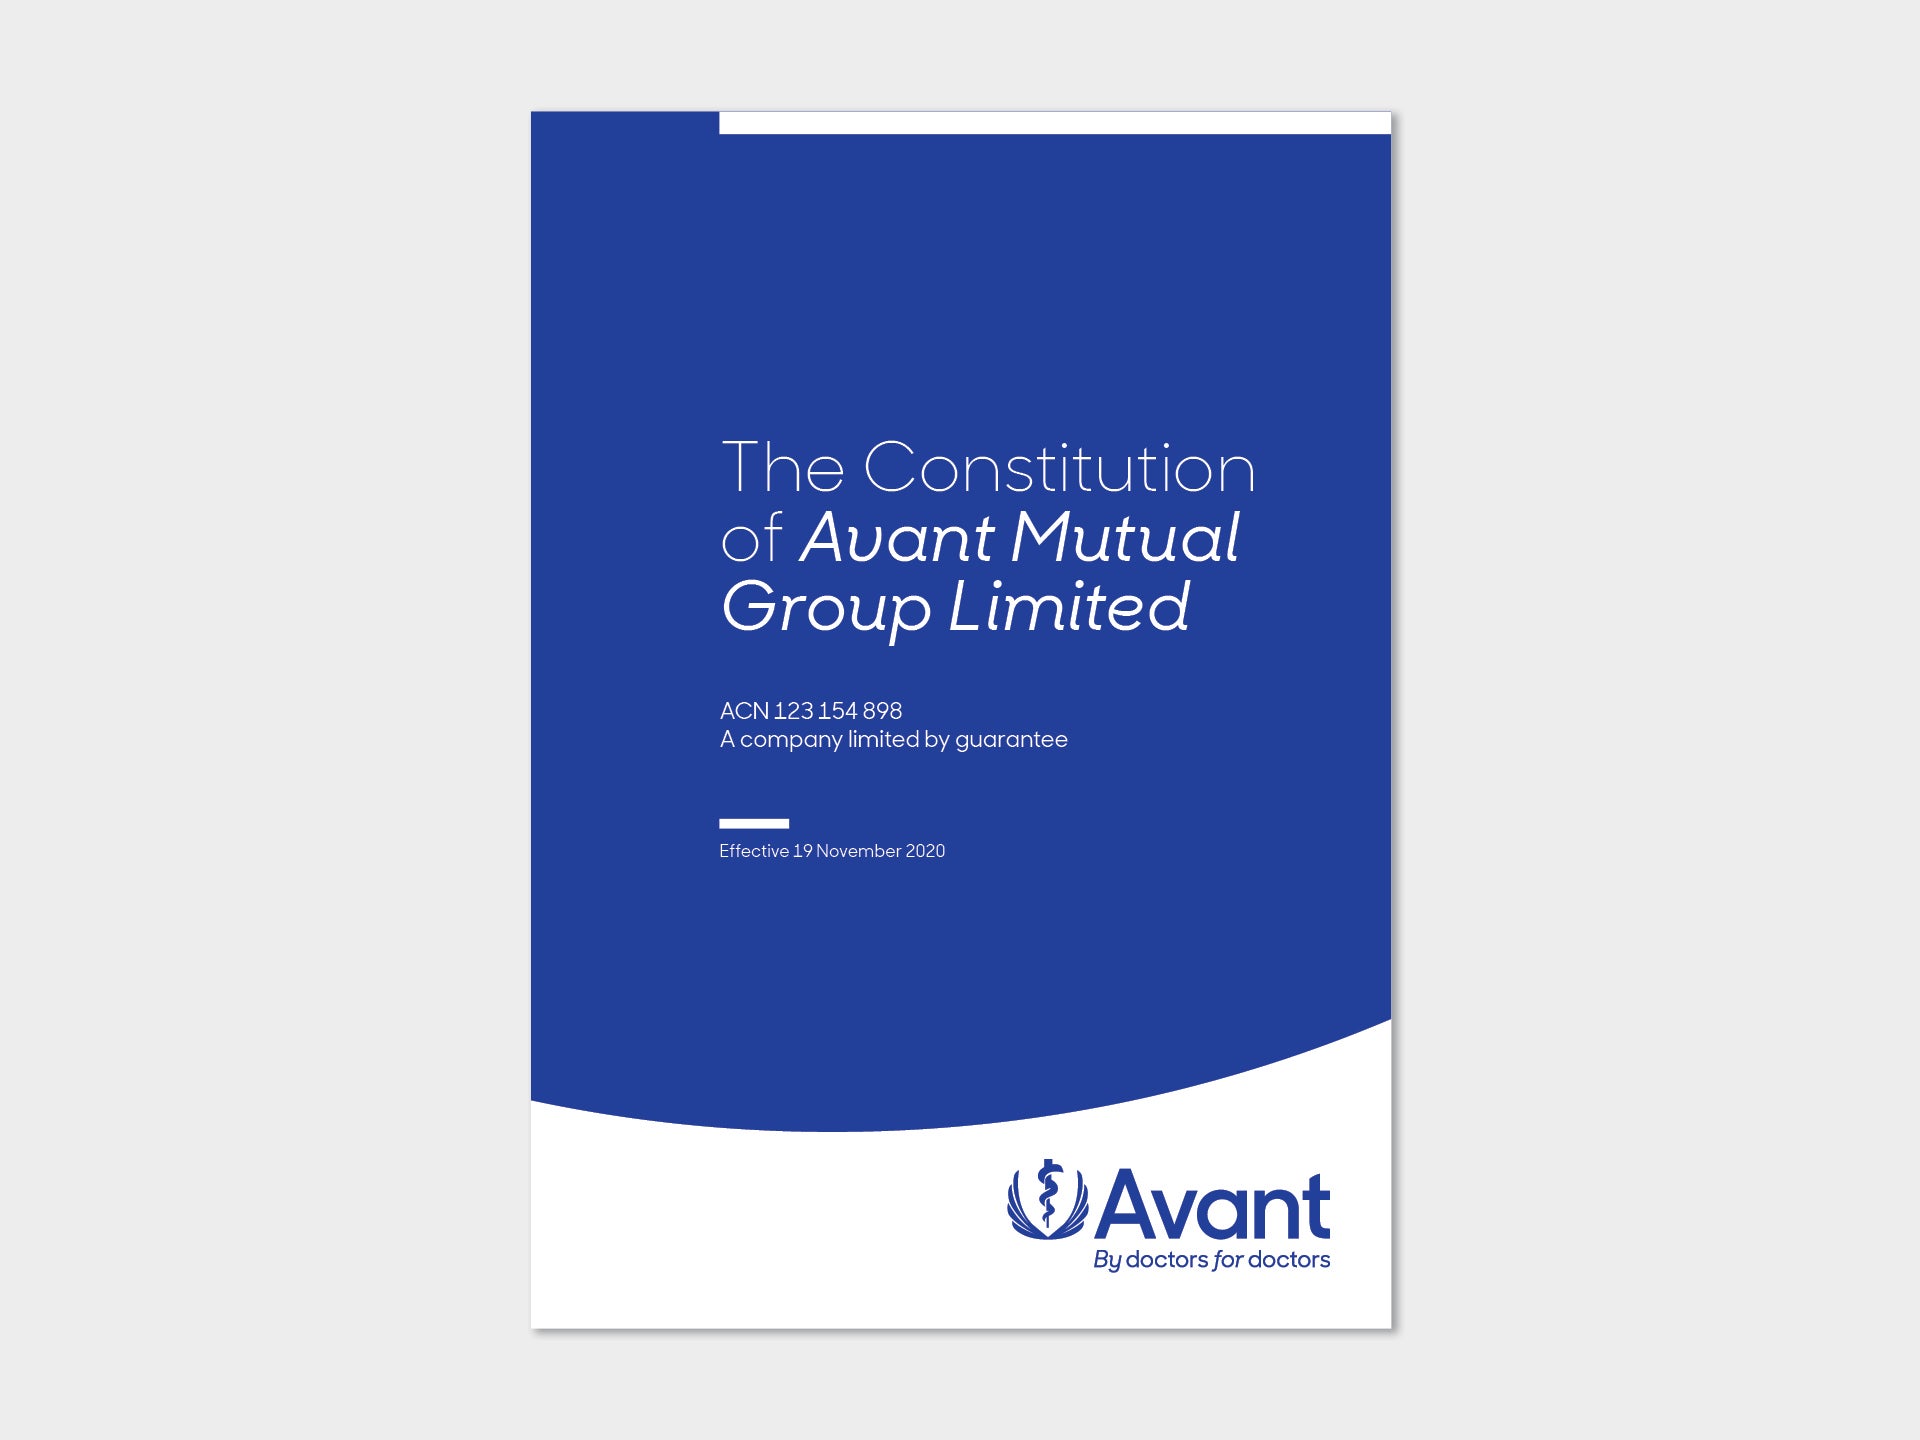 The constitution of Avant Mutual Group Limited